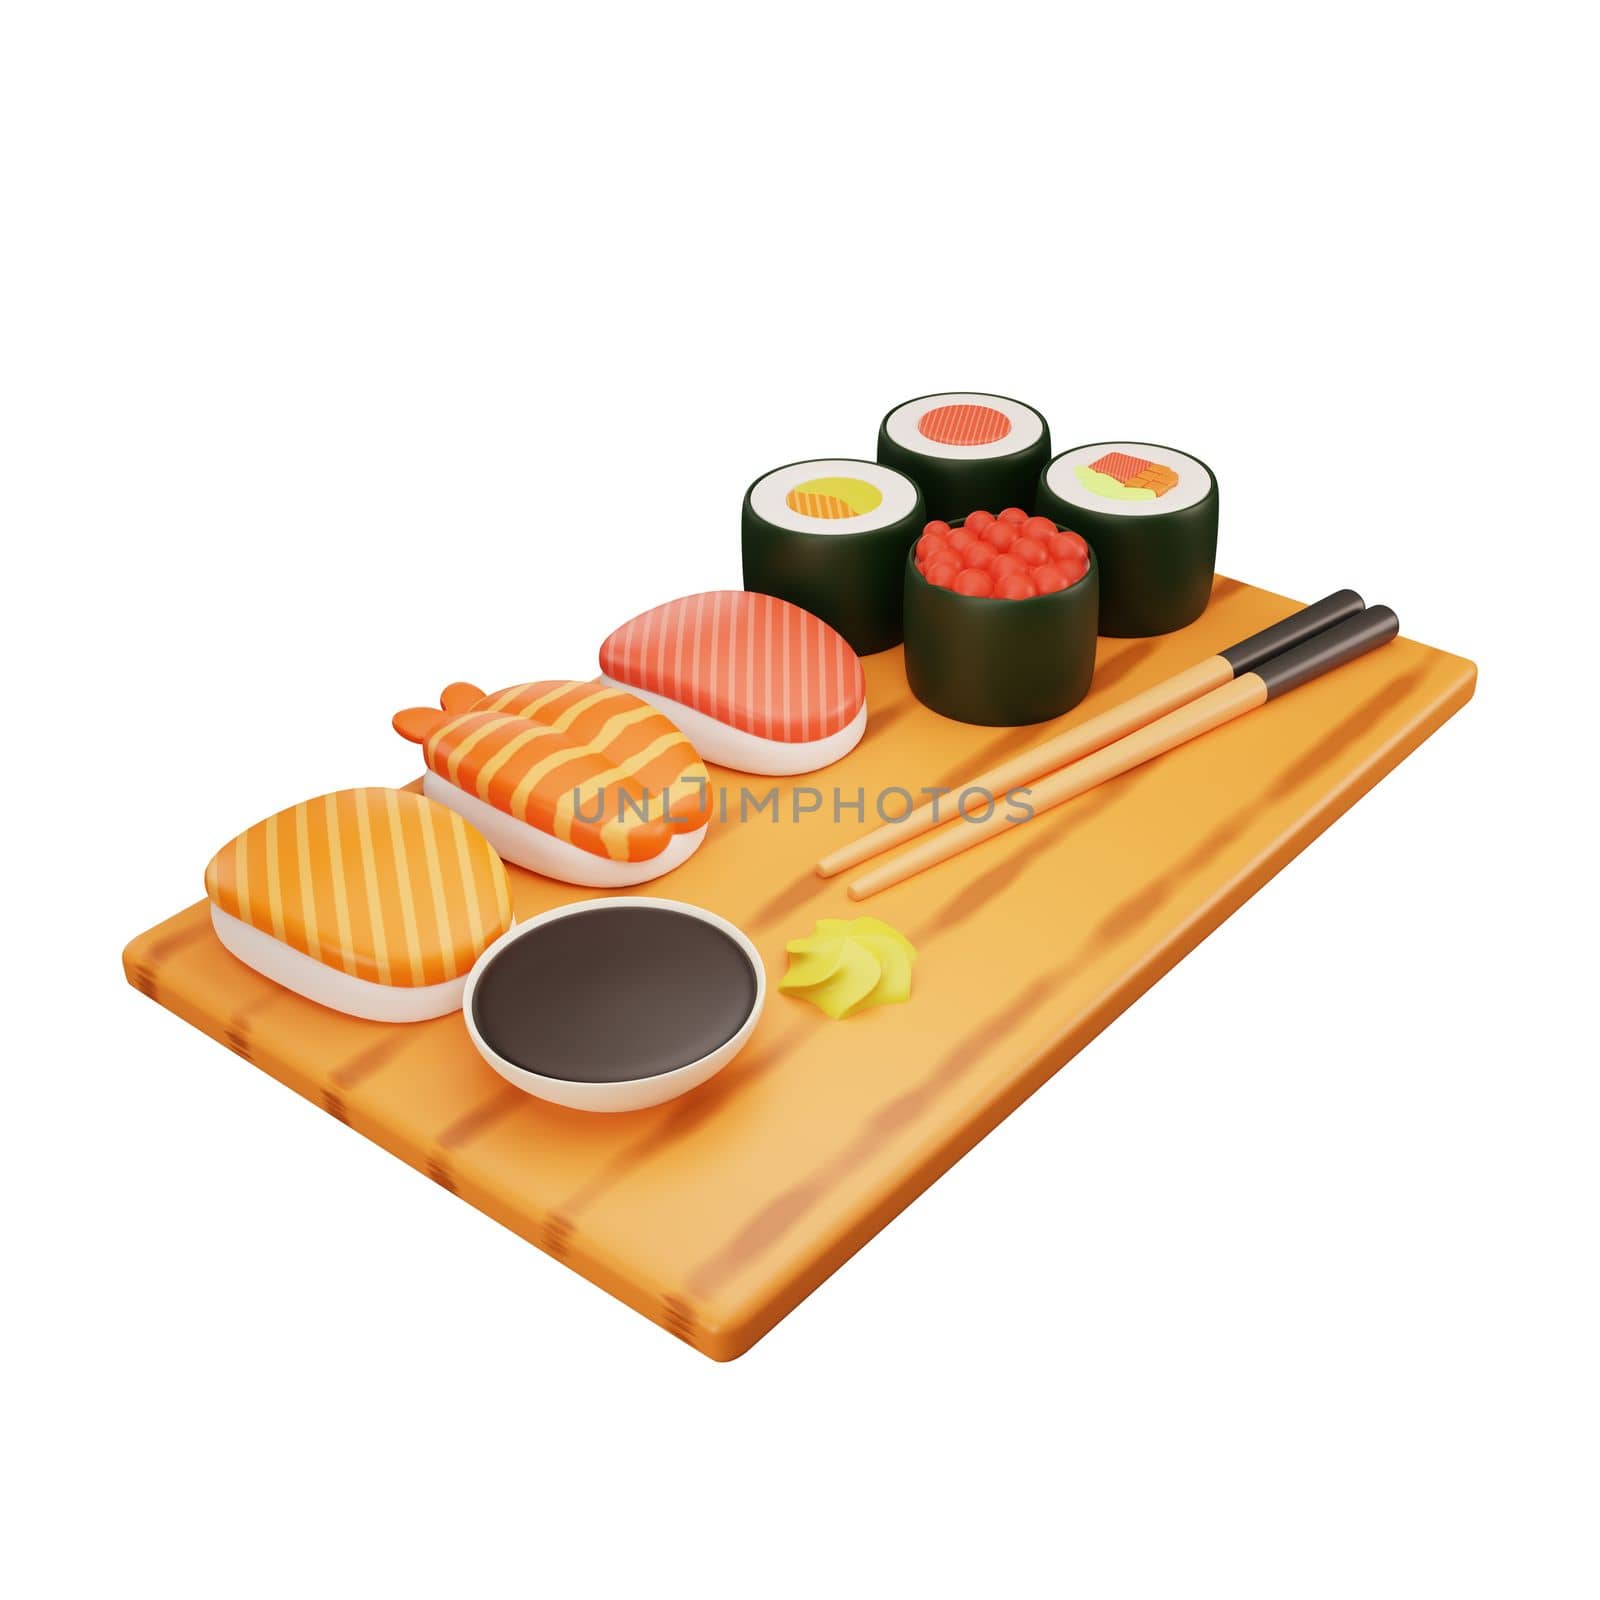 3d rendering of sushi fast food icon